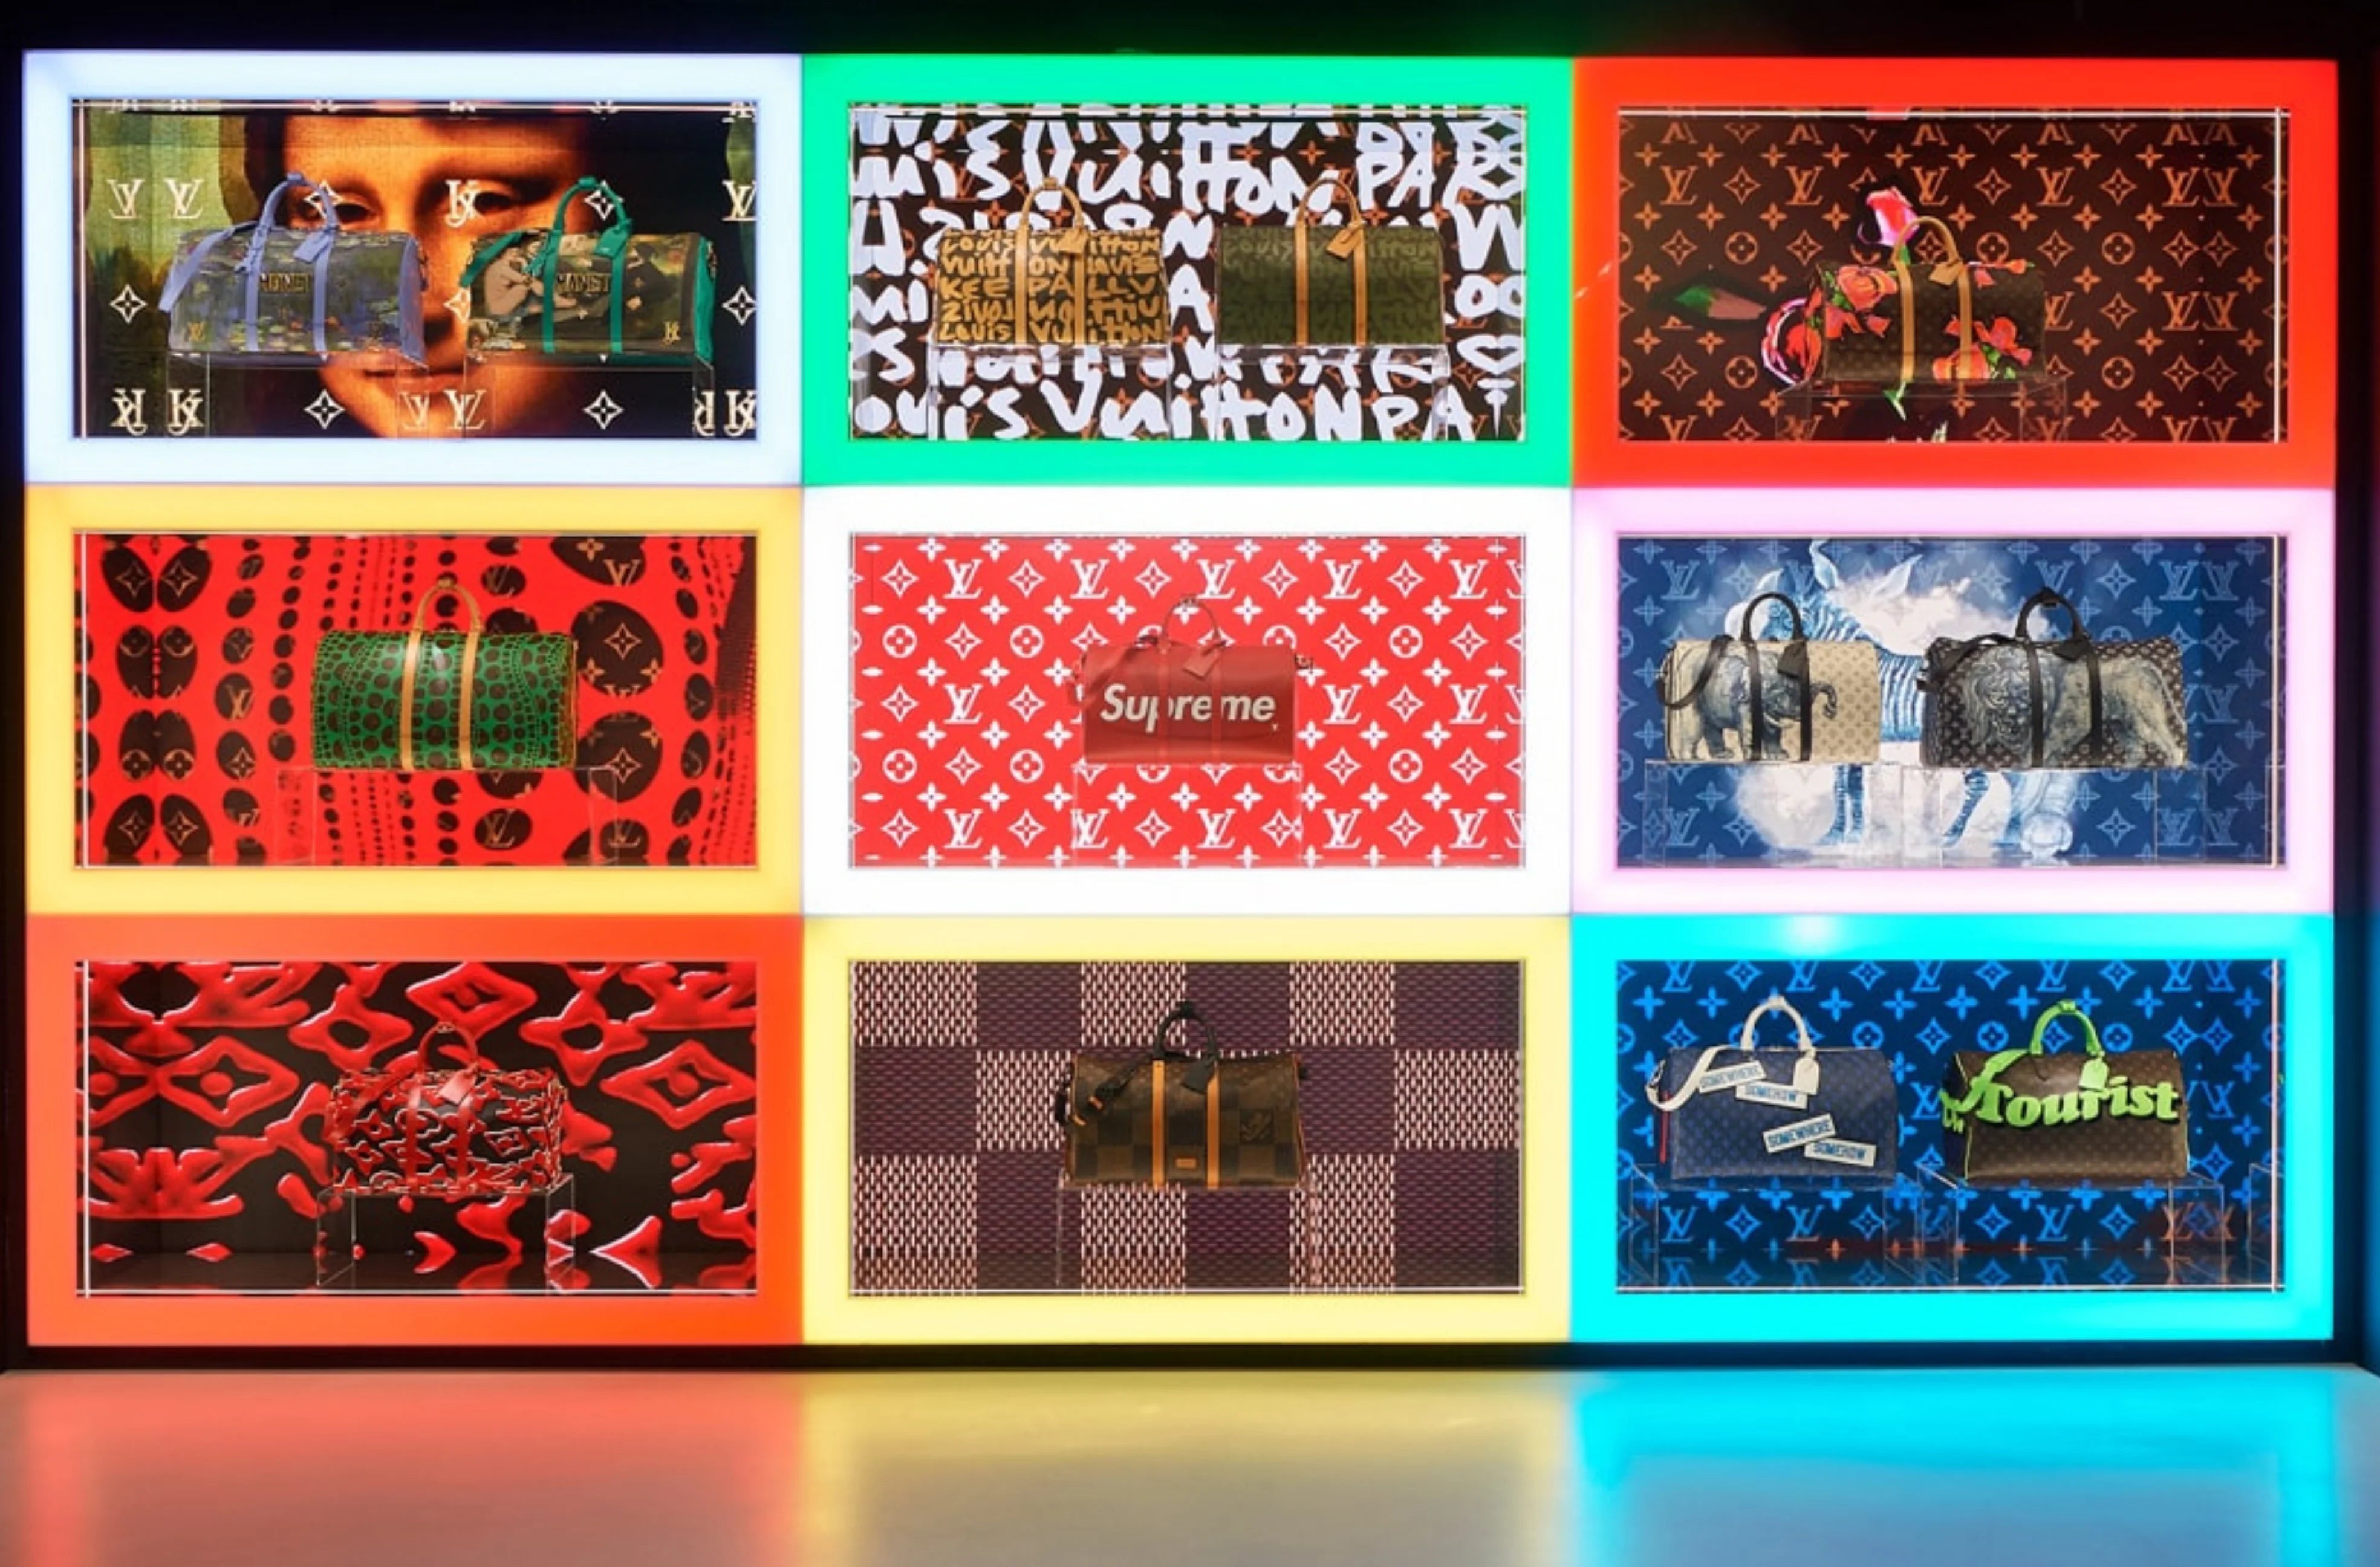 louis vuitton X exhibition immerses visitors in 160 years of